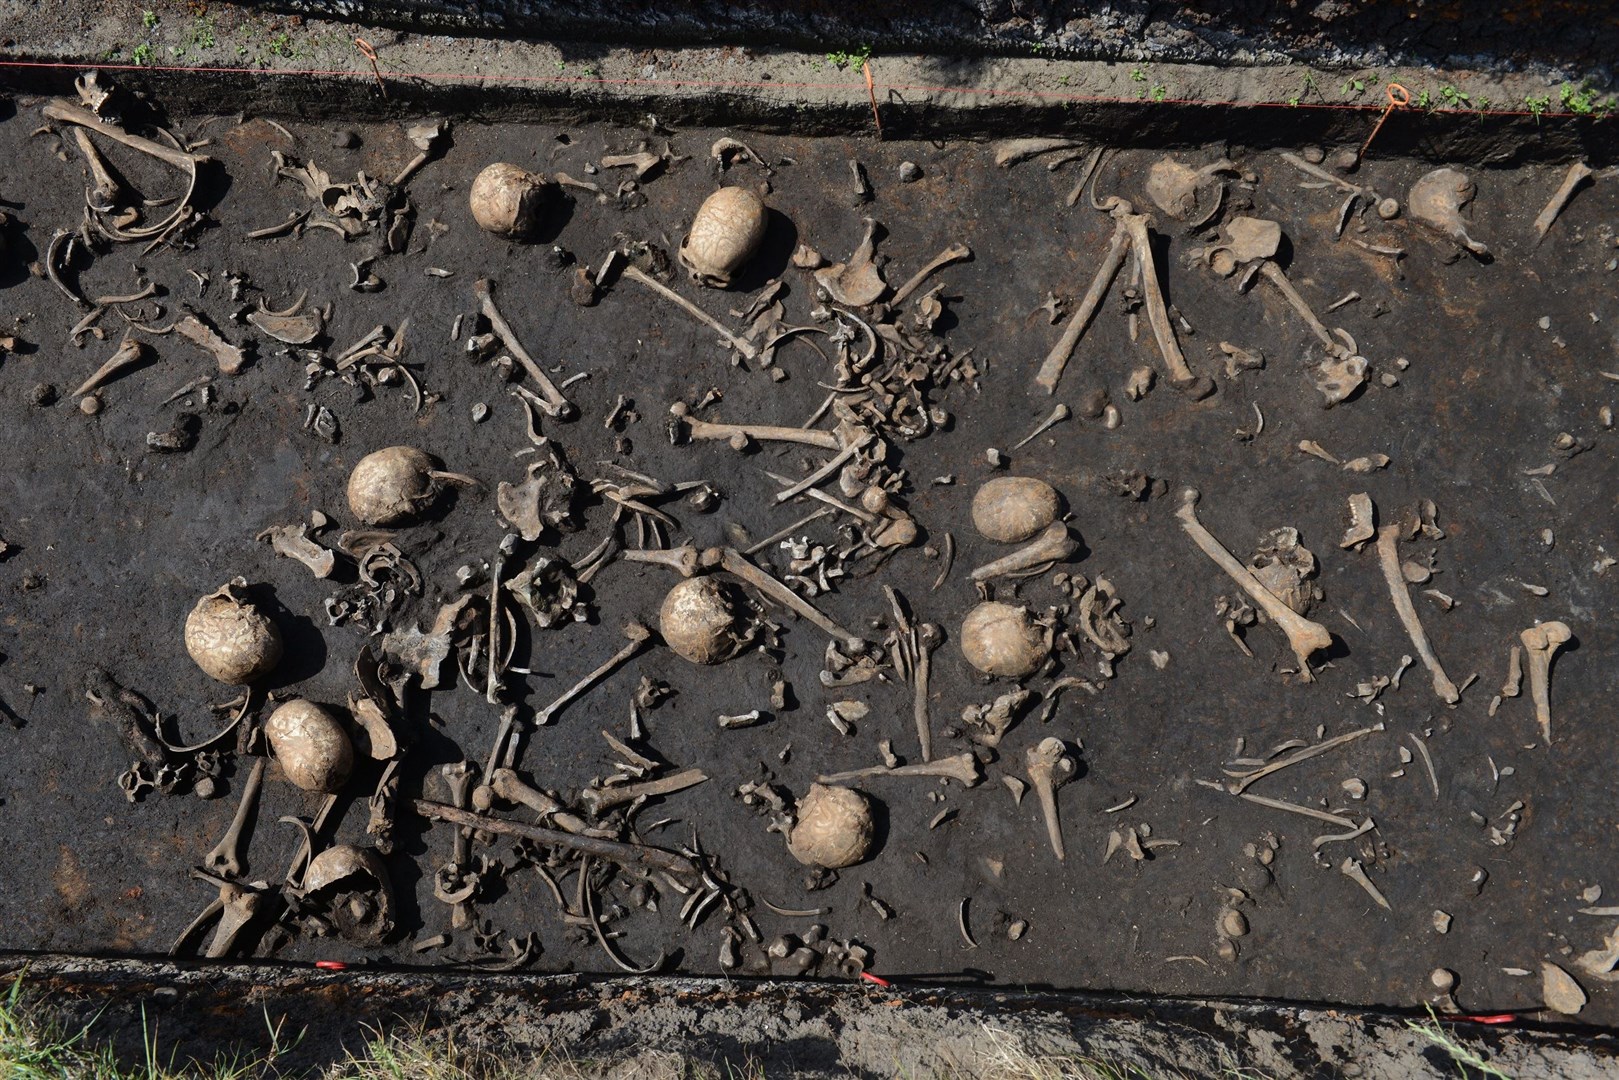 Bones from more than 100 individuals have been discovered on the battlefield (Stefan Sauer/Tollense Valley Project/PA)